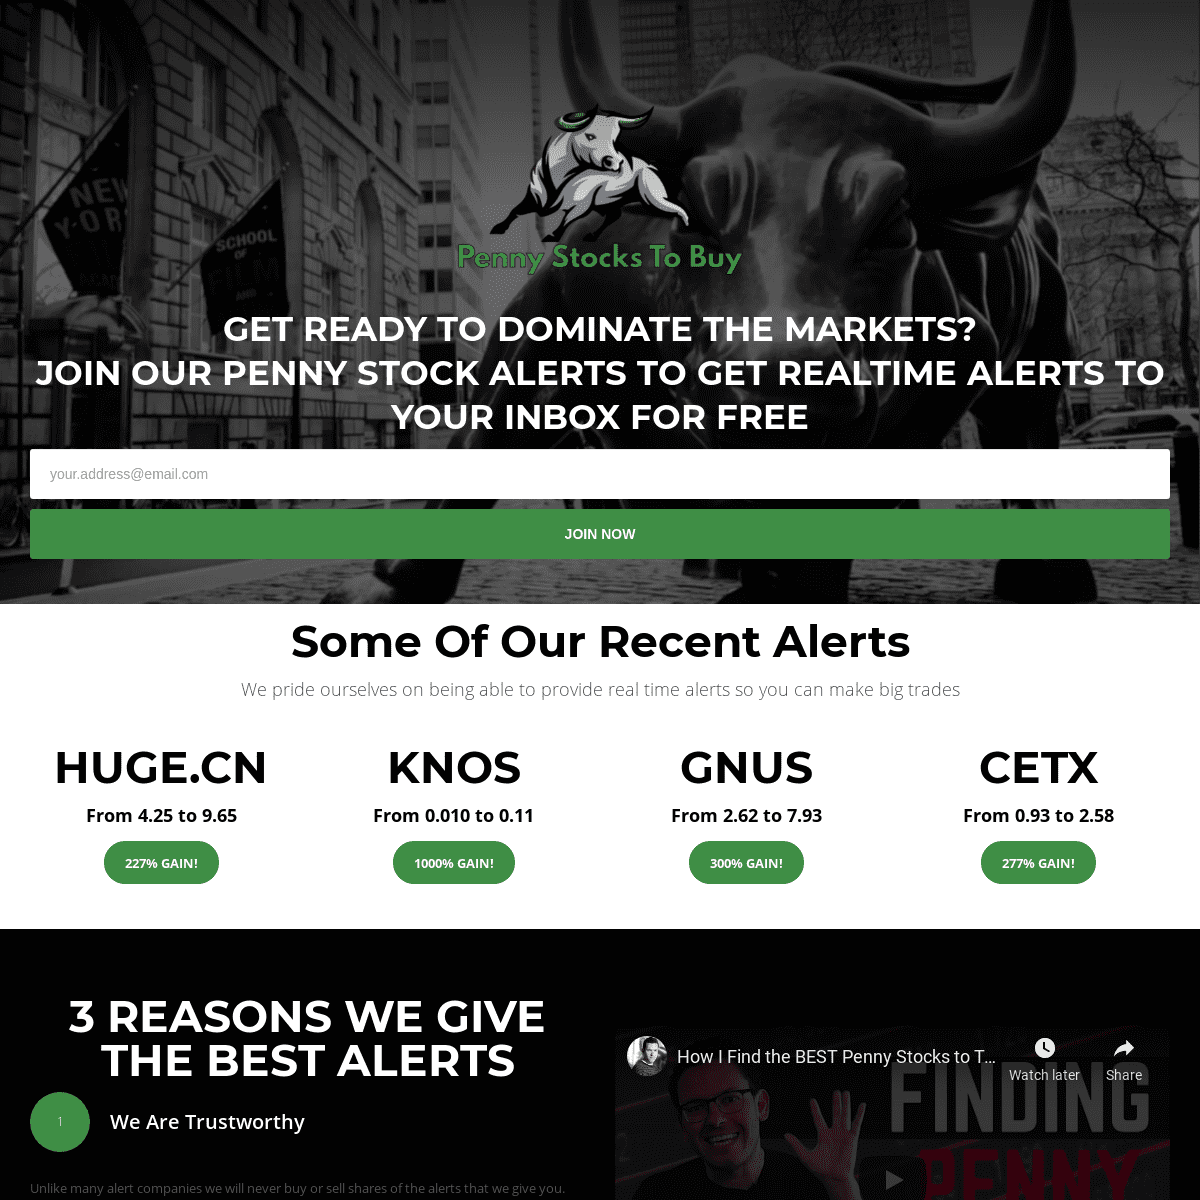 A complete backup of https://penny-stocks-to-buy.com